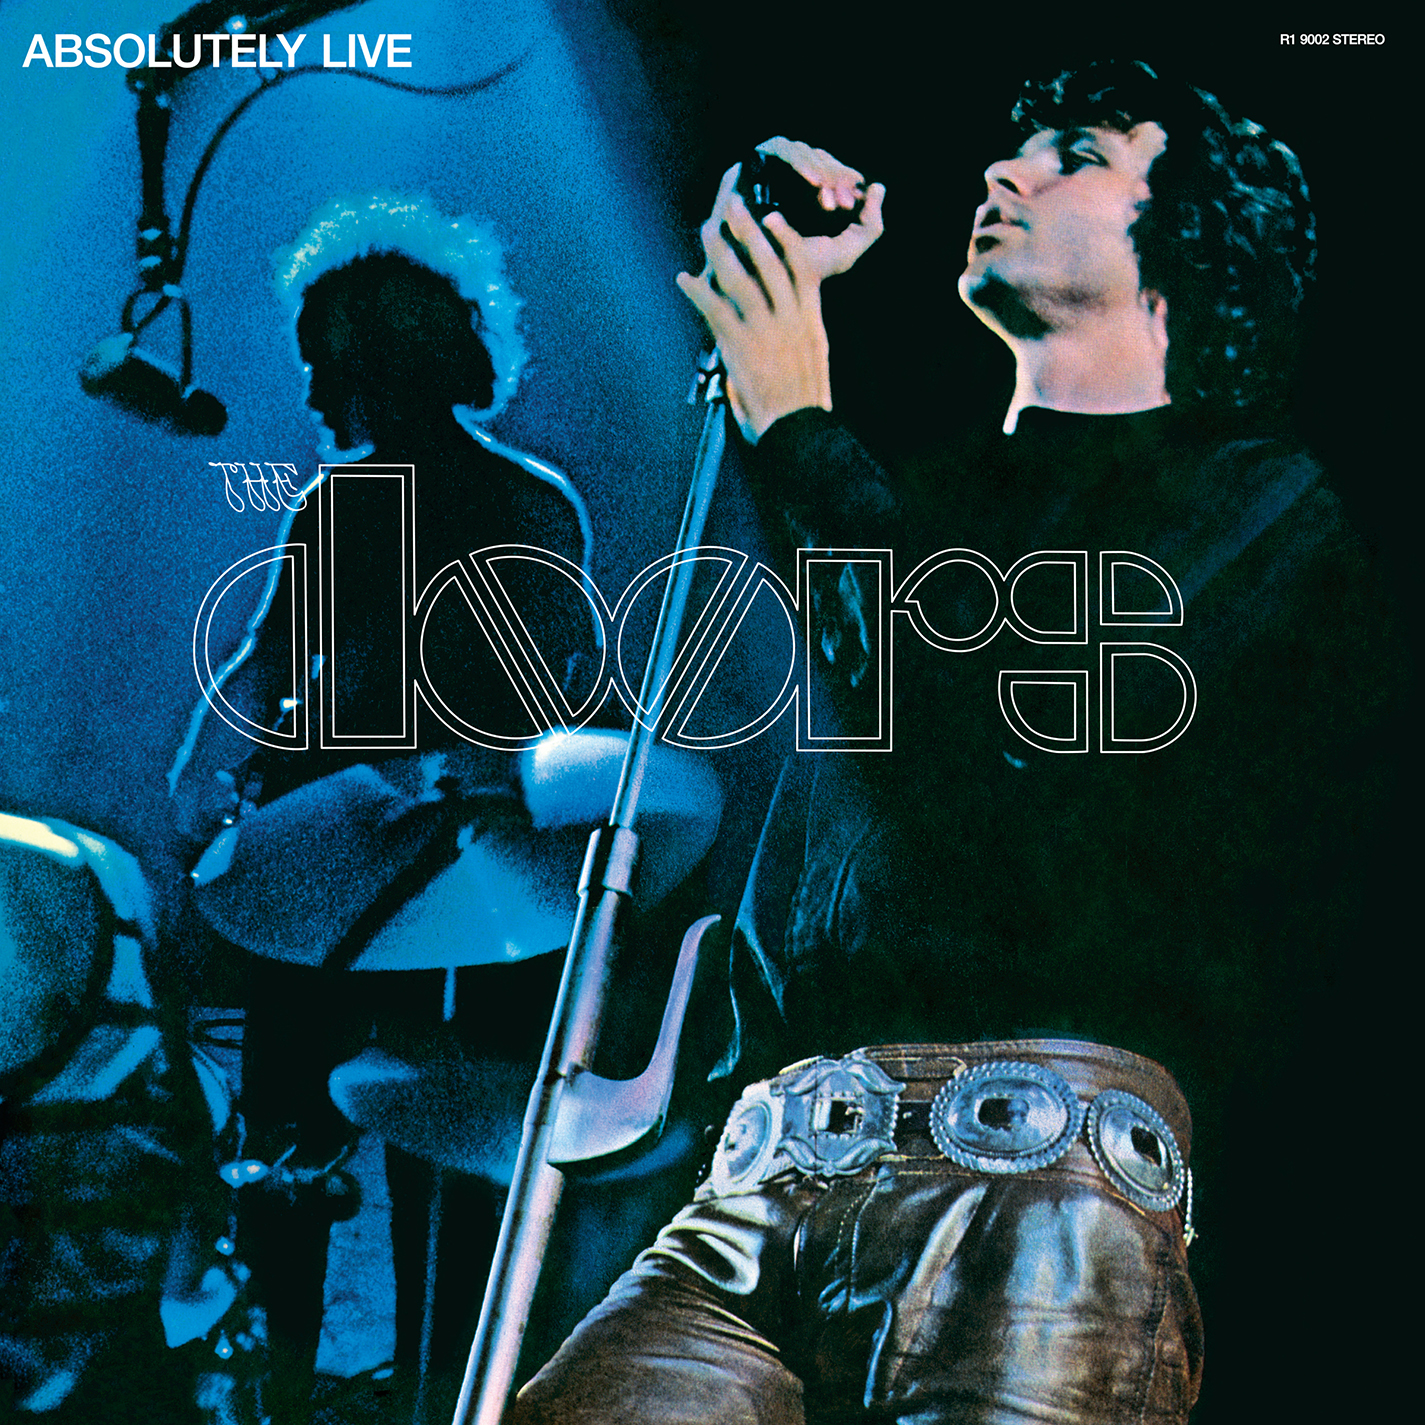 Absolutely Live (blue Edition) (vinyl)